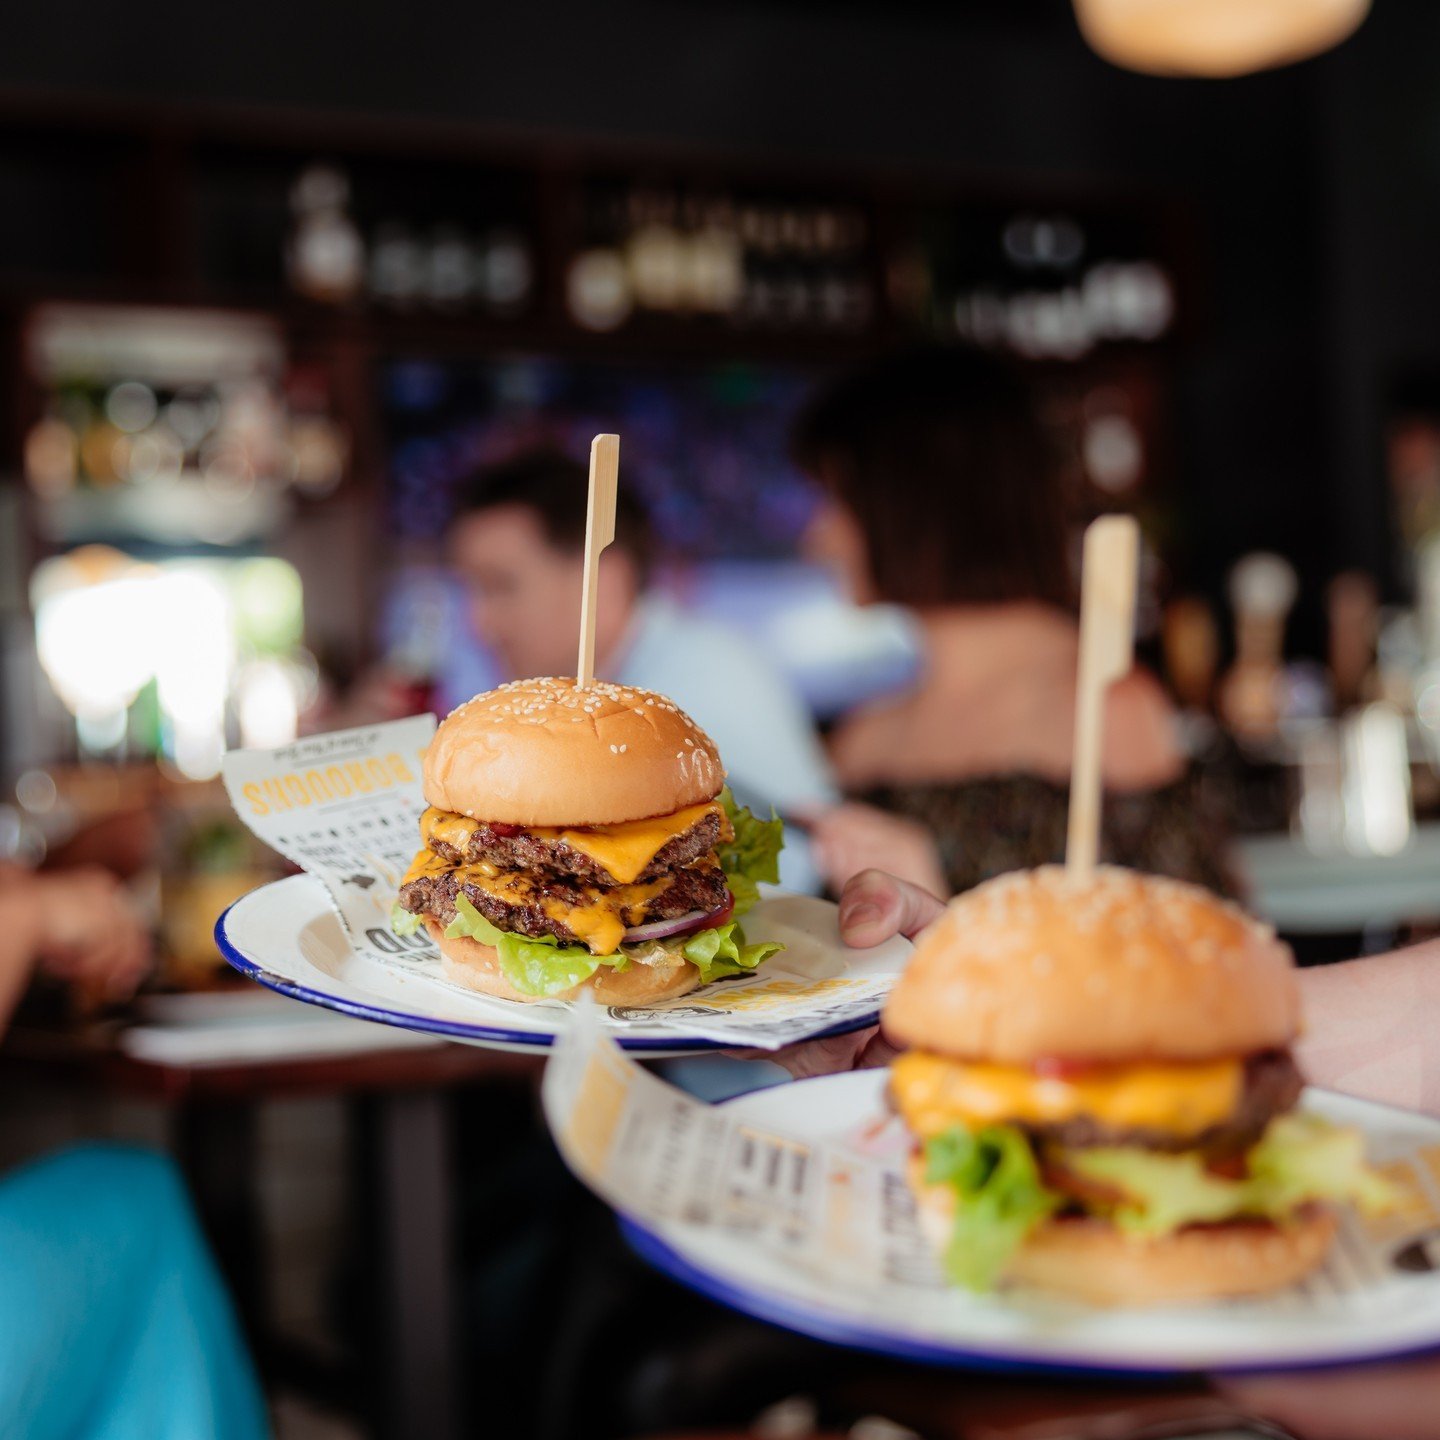 So we've just solved your 'what's for dinner?' dilemma... BURGERS 🍔

Let your local 5 Boroughs satisfy your cravings tonight and we'll handle the dishes. Plus, if you're in the mood for a bevvy, we're open 'til late 🍻